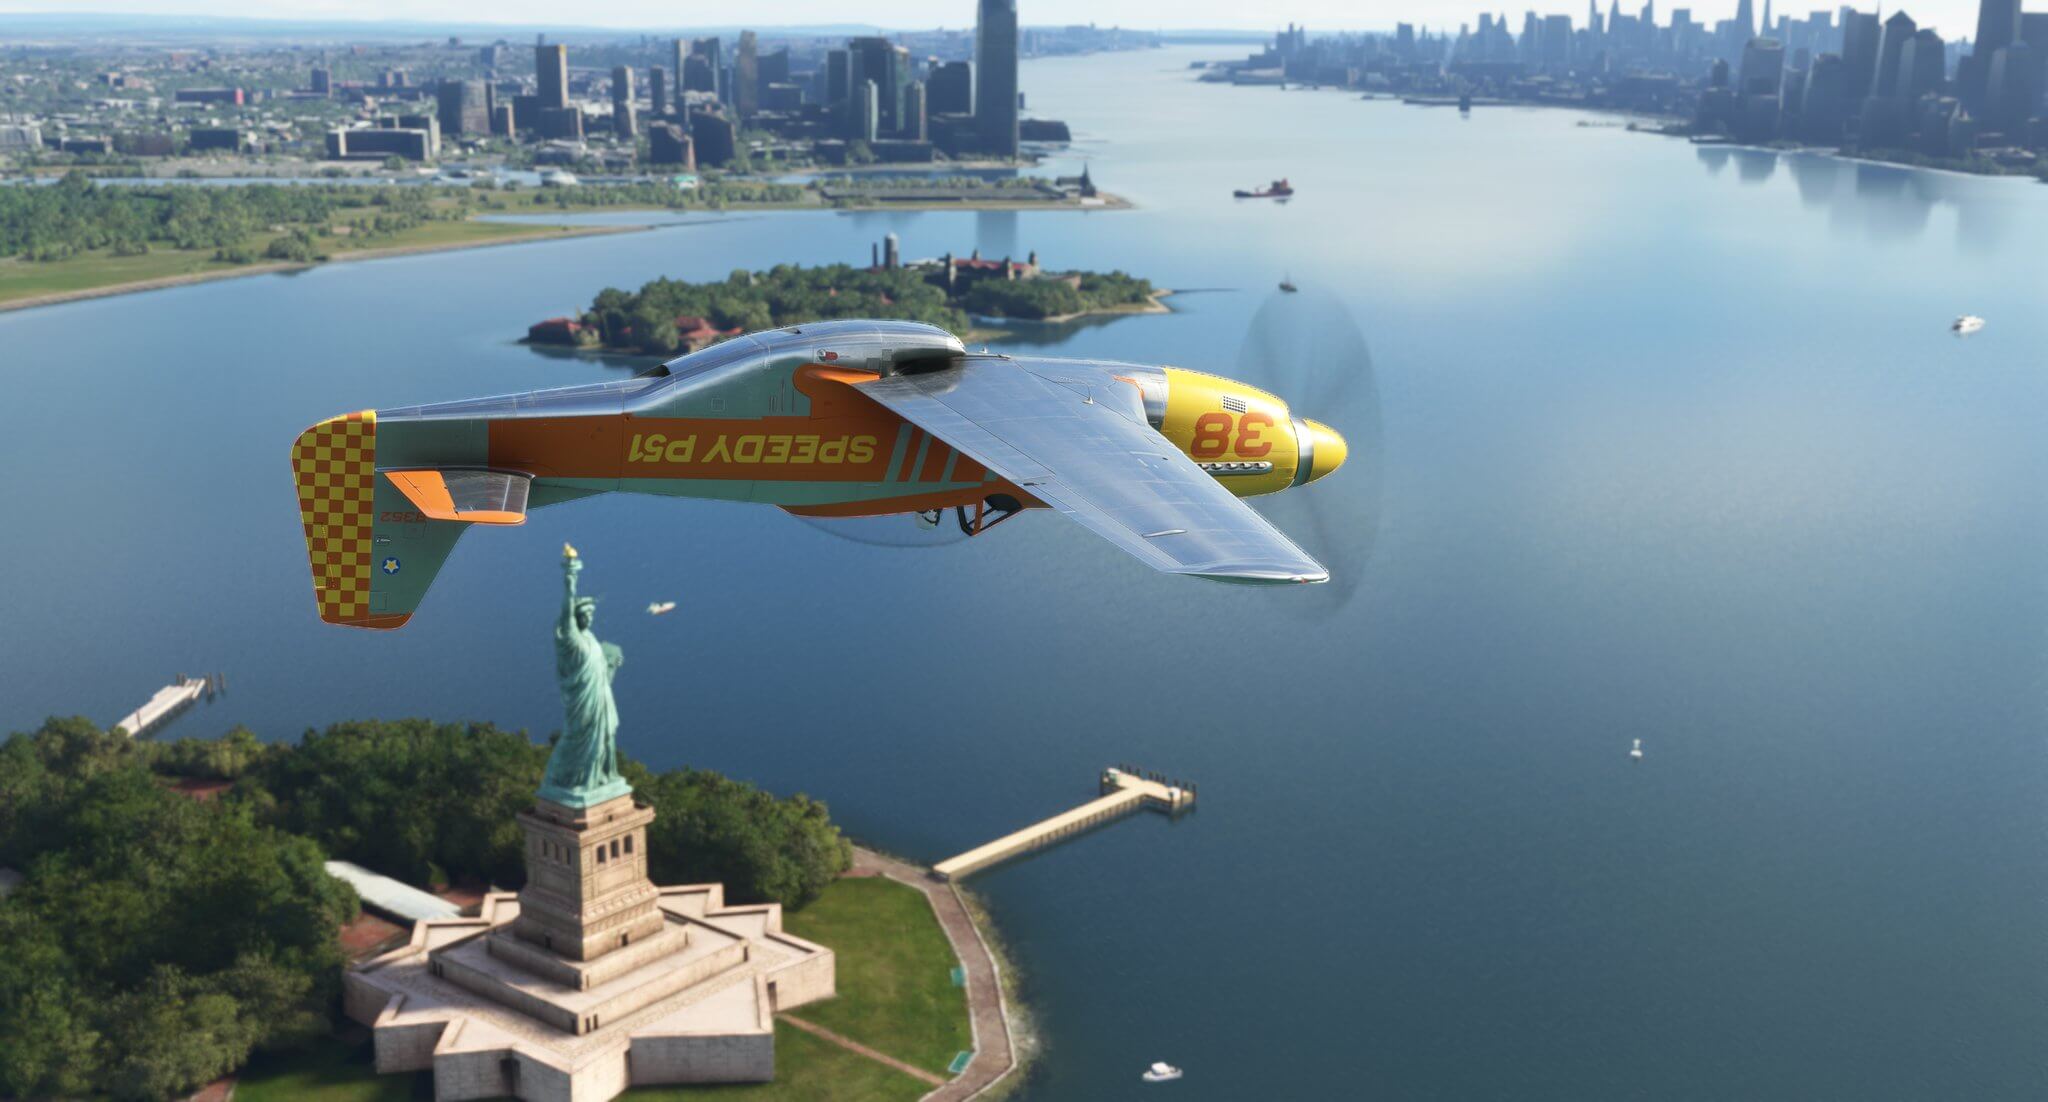 A P-51 yellow and silver Mustang passes inverted over the Statue of Liberty in New York City.